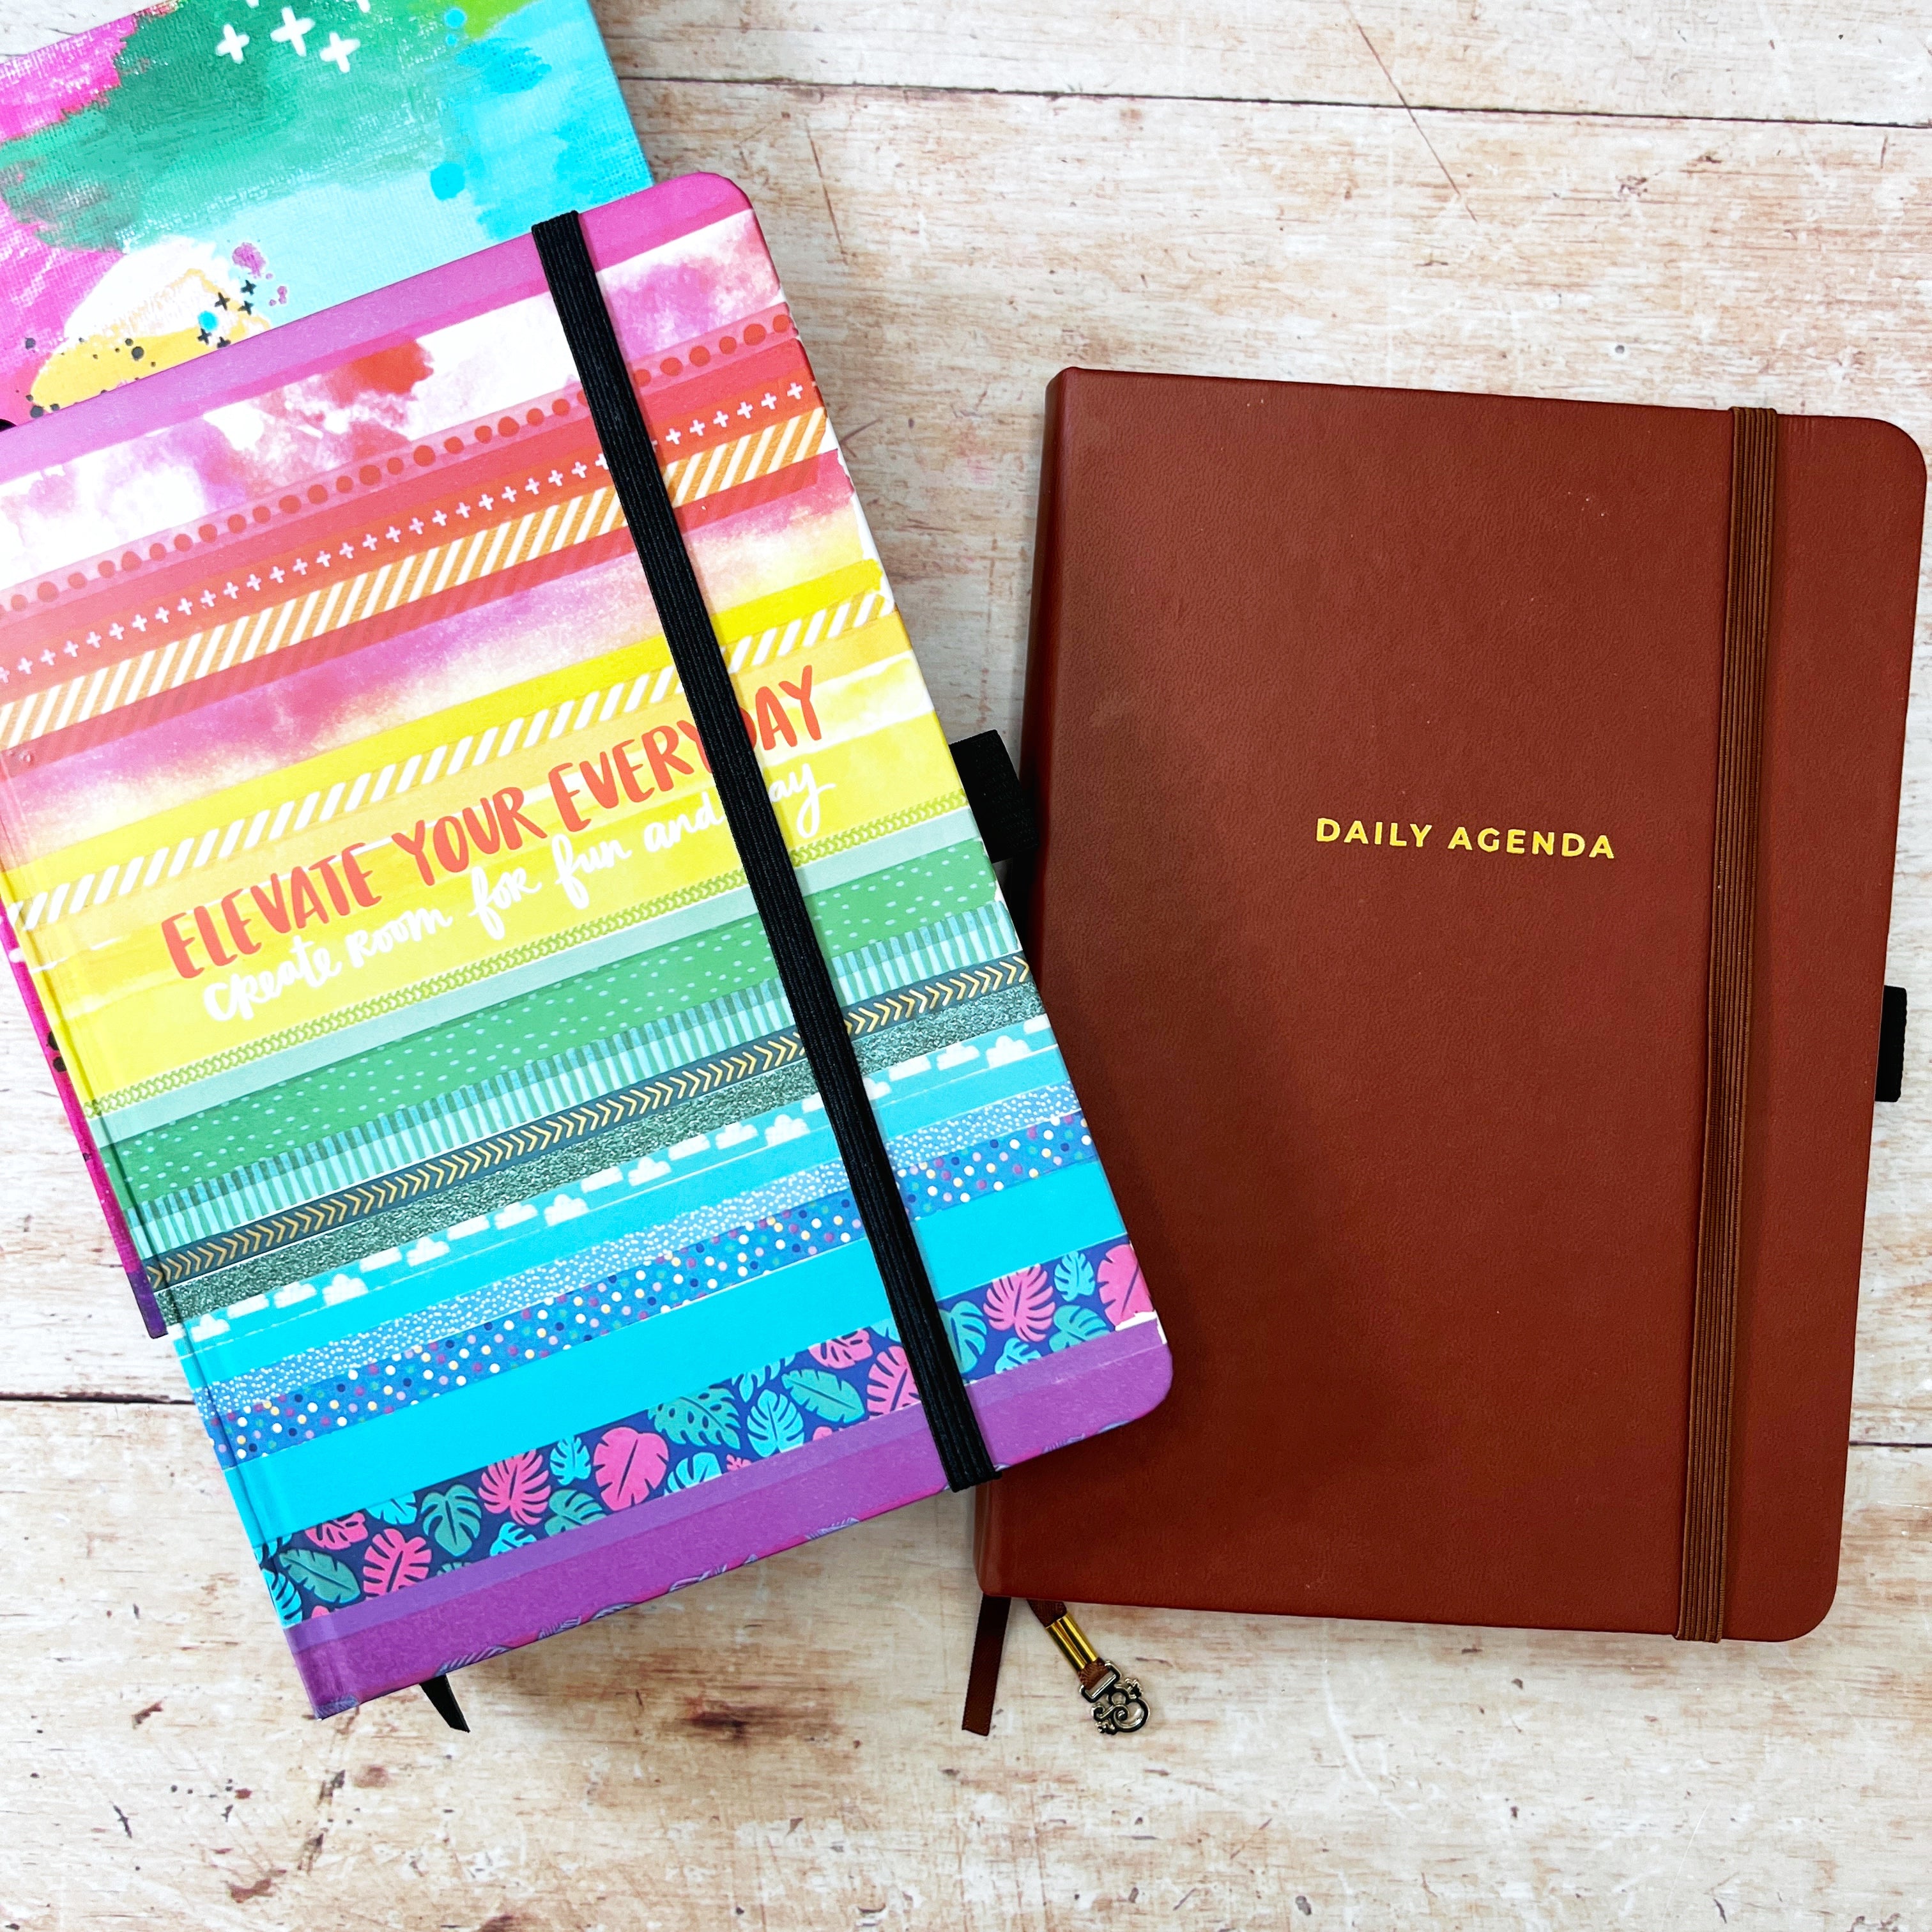 Bright coloured planner with ‘ elevate your everyday’ written on it and a brown planner